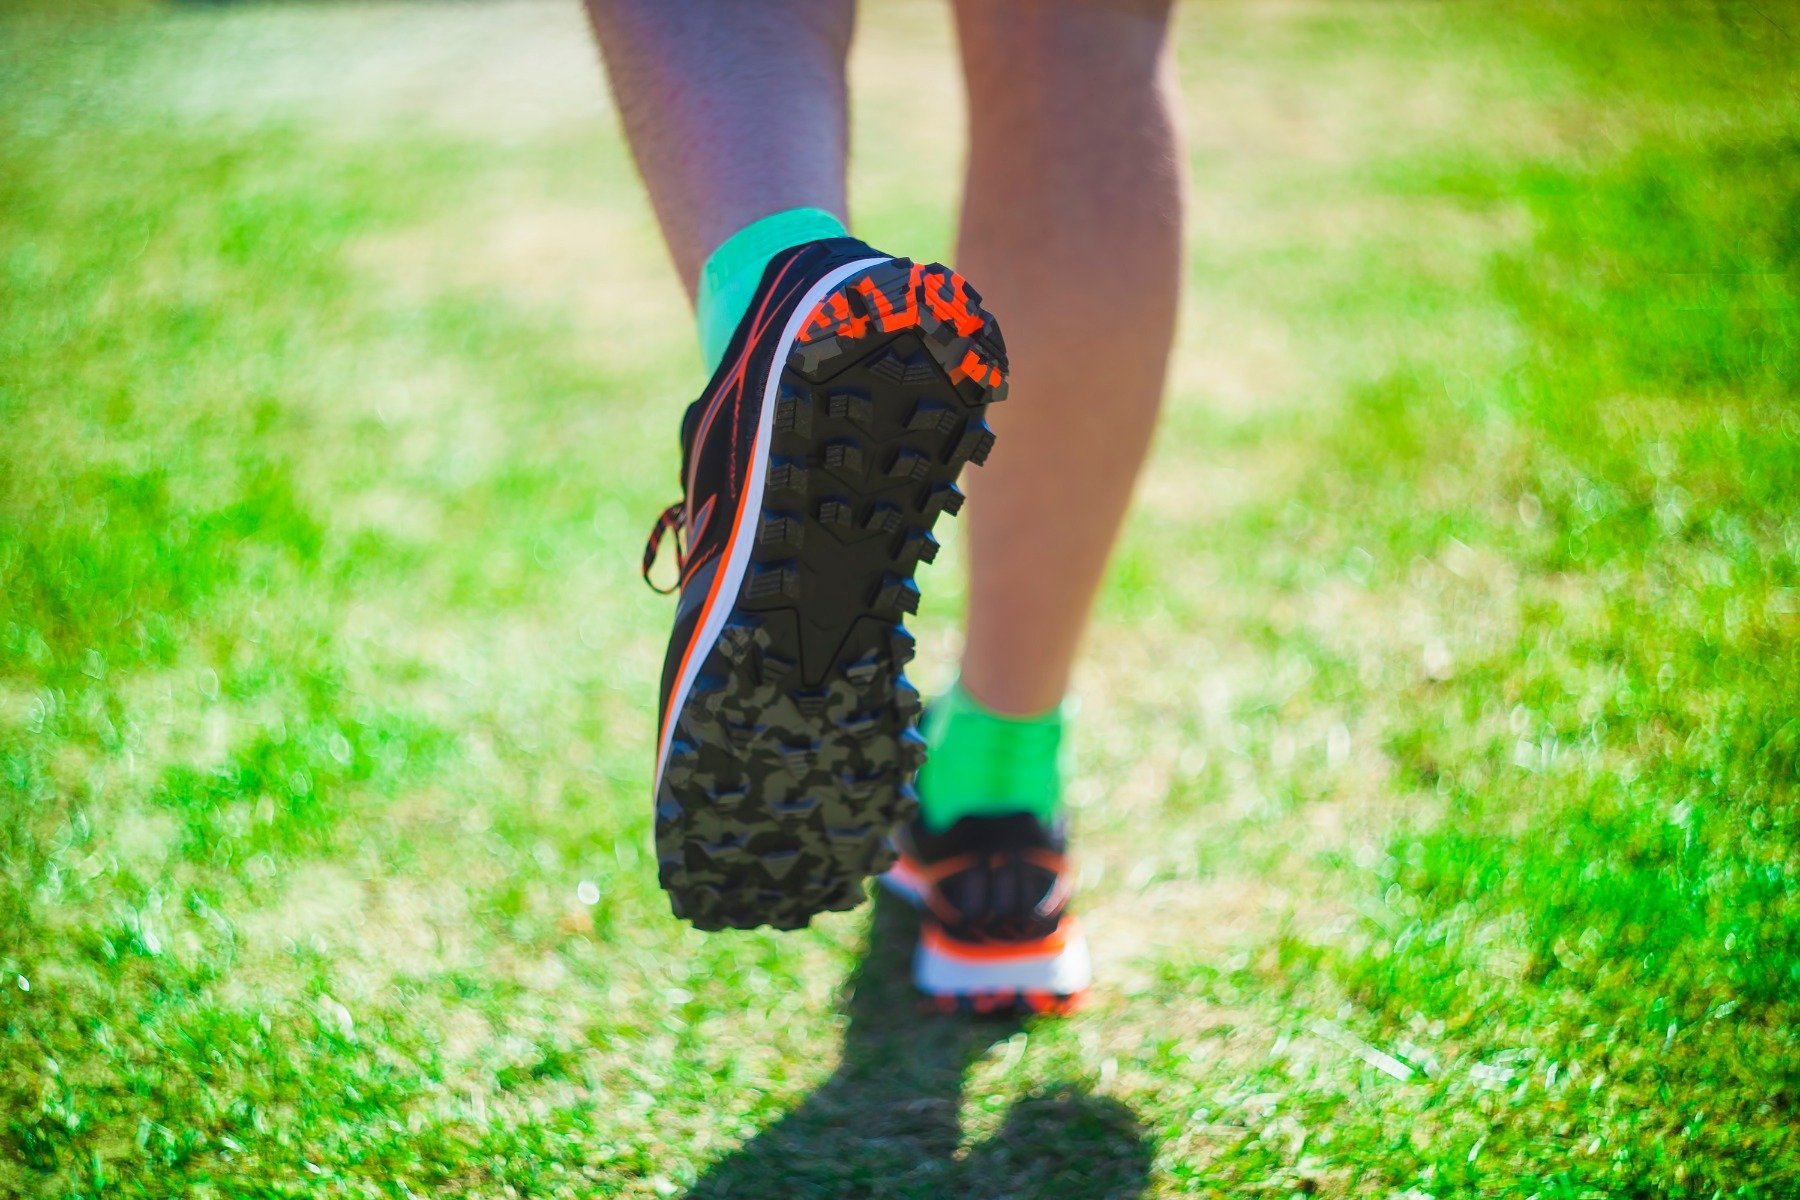 5 tips for choosing athletic shoes